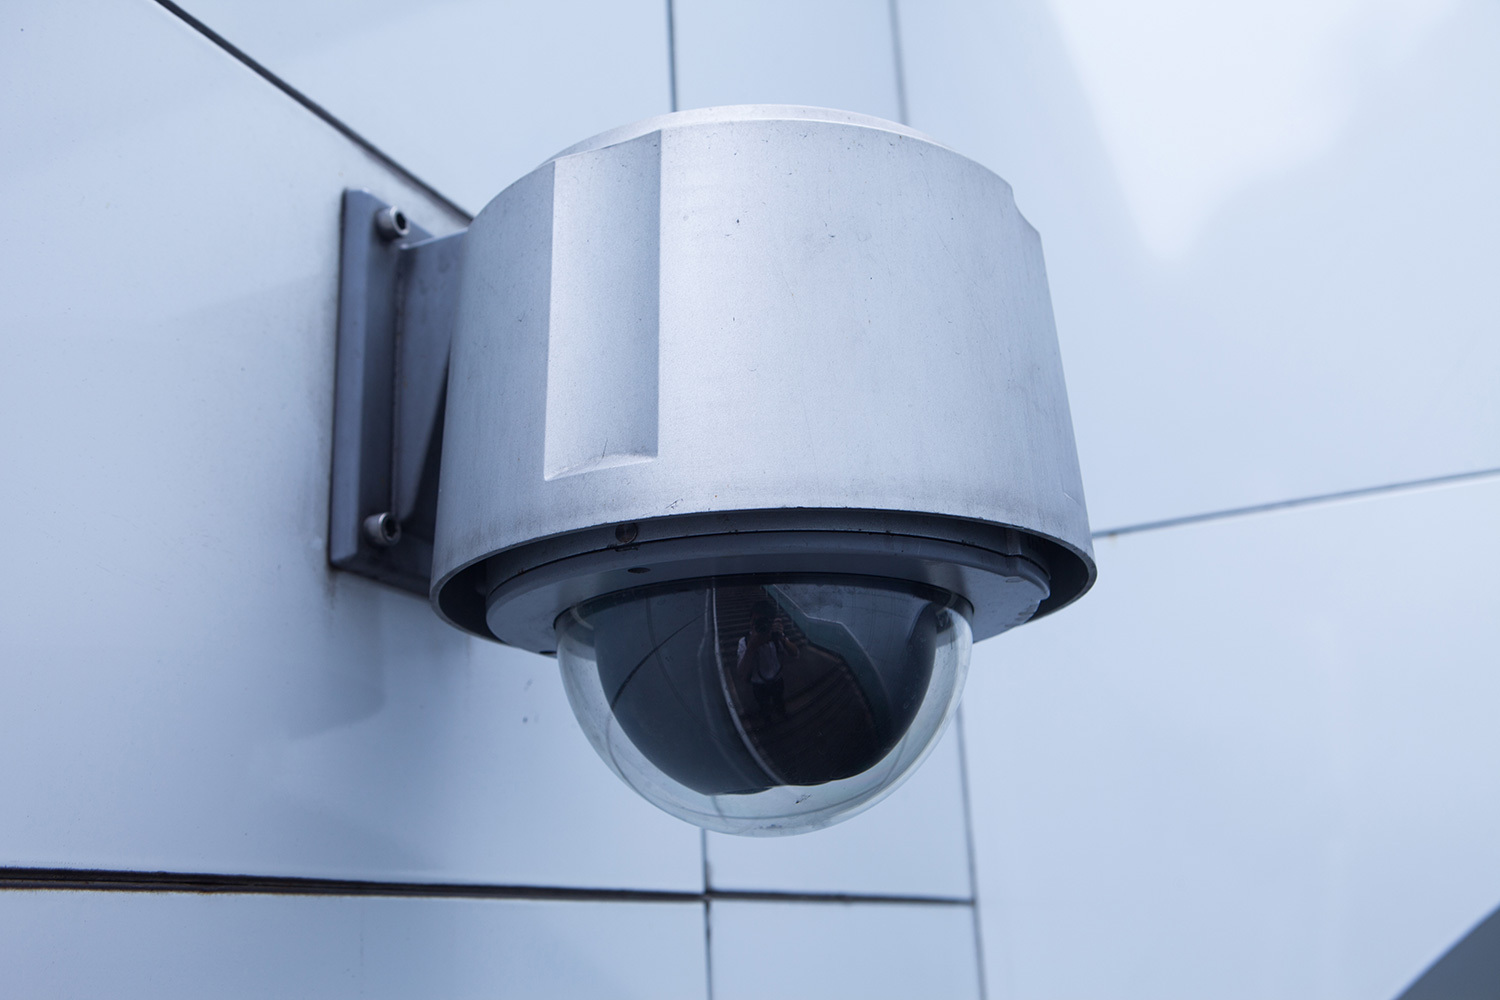 <span style="font-weight: bold;">Security cameras</span><br>